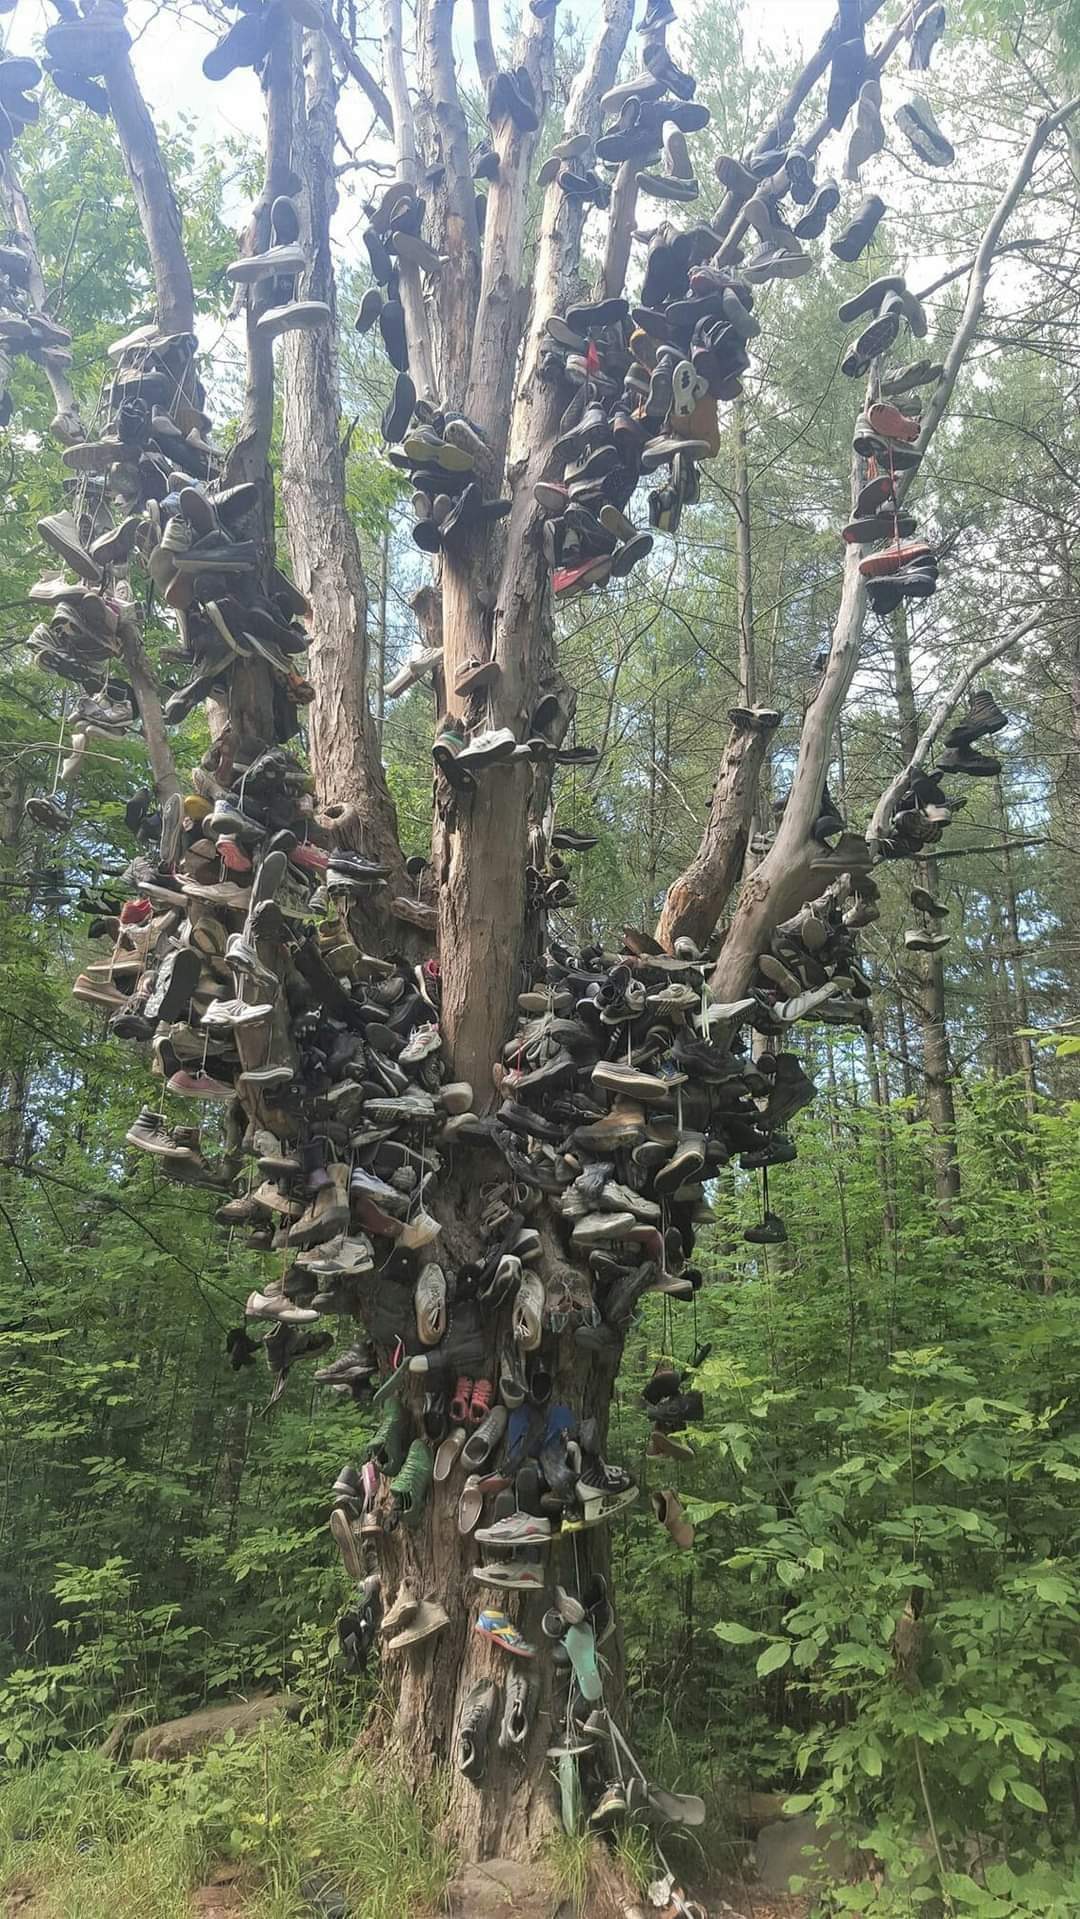 Hundred of Extinct Shoes Strung Over an Outmoded Ineffective Tree, Ontario Canada